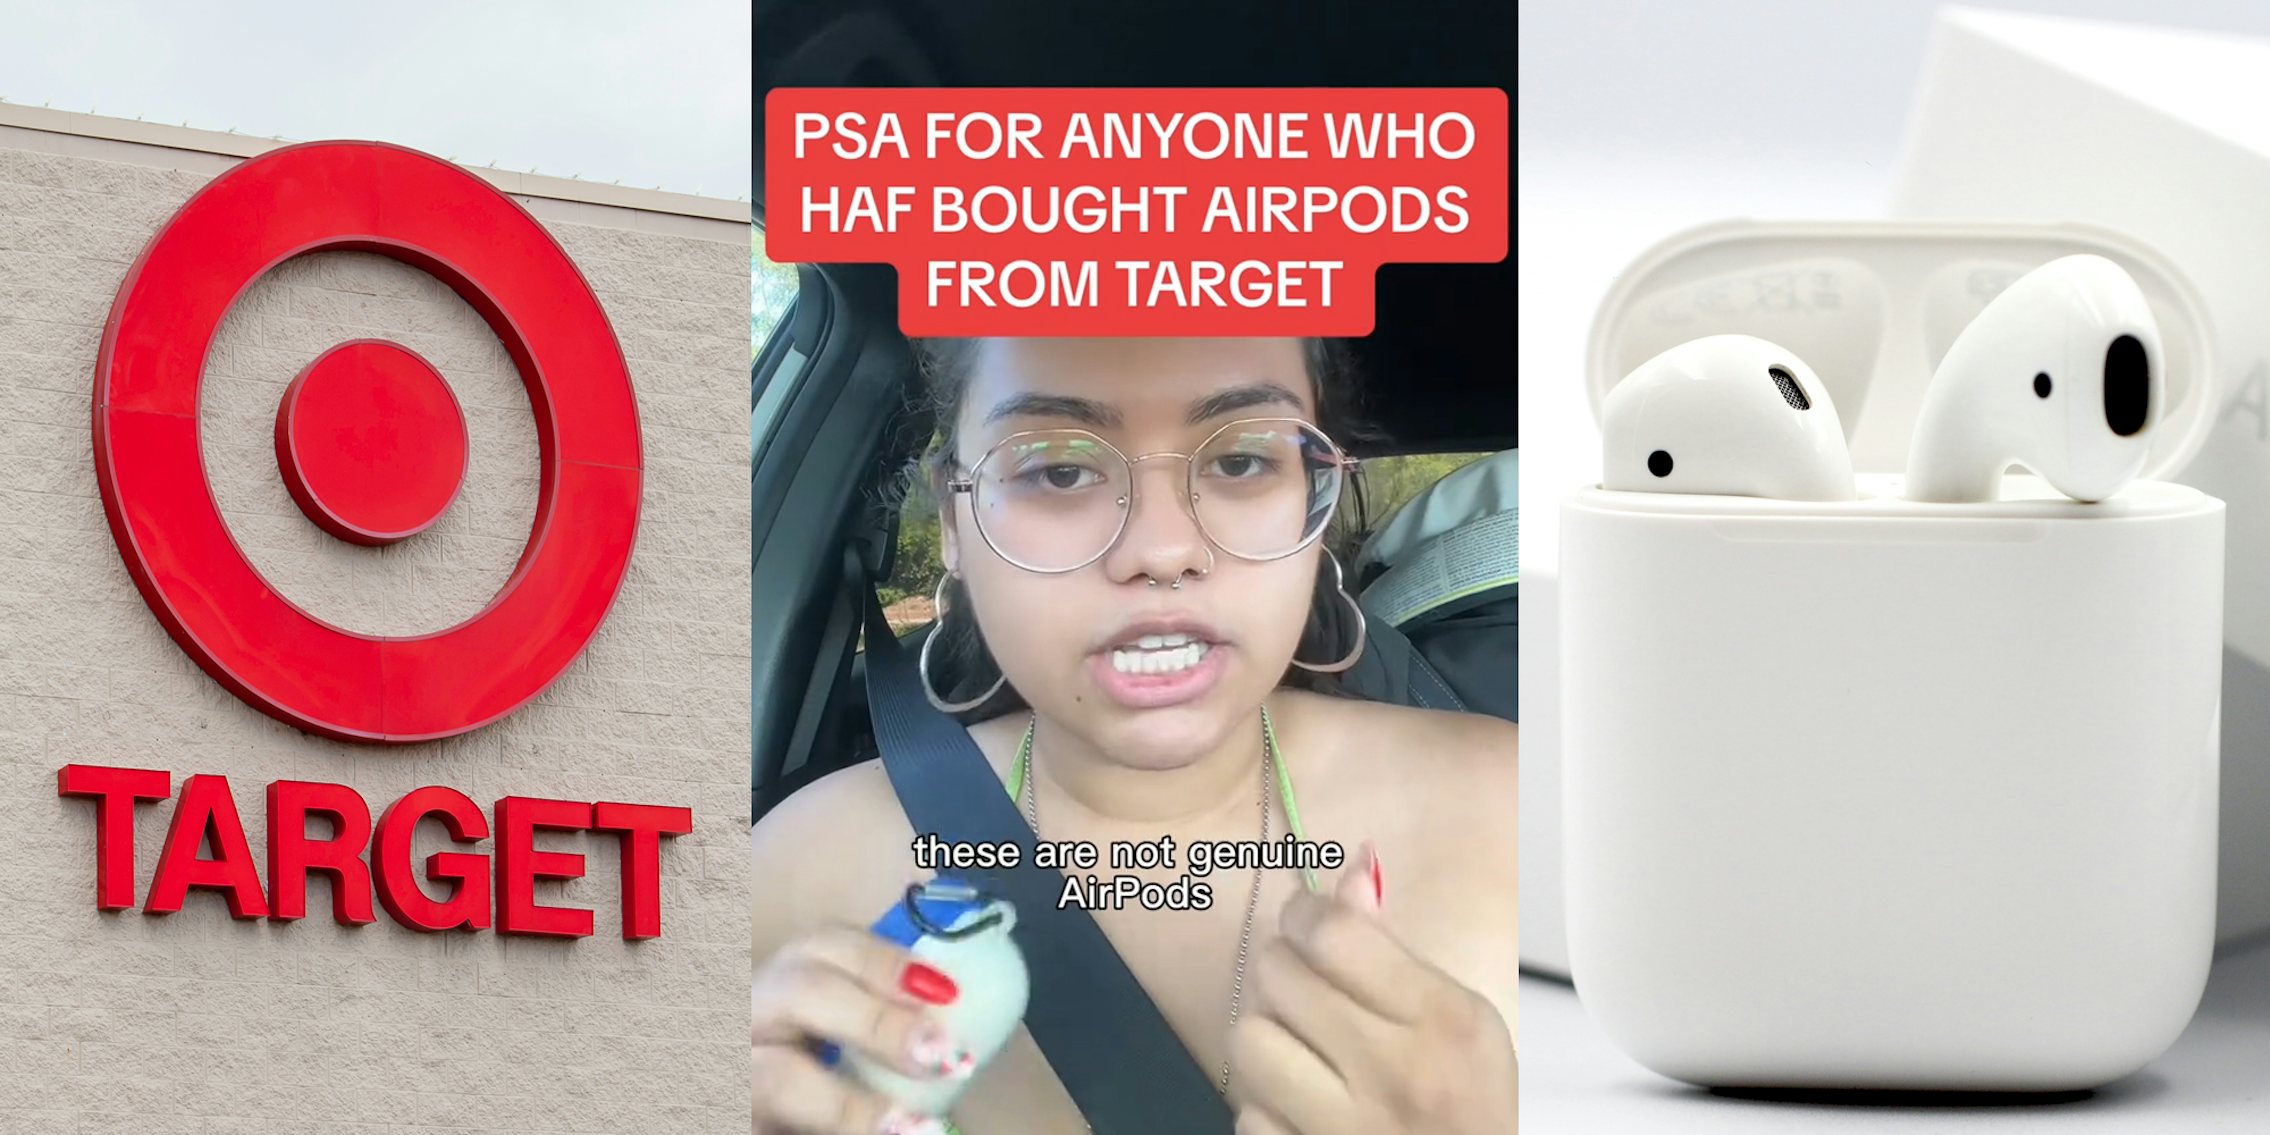 Target sign on building (l) Target customer speaking in car with caption 'PSA FOR ANYONE WHO HAF BOUGHT AIRPODS FROM TARGET these are not genuine AirPods' (c) Apple AirPods in case in front of box in front of white background (r)